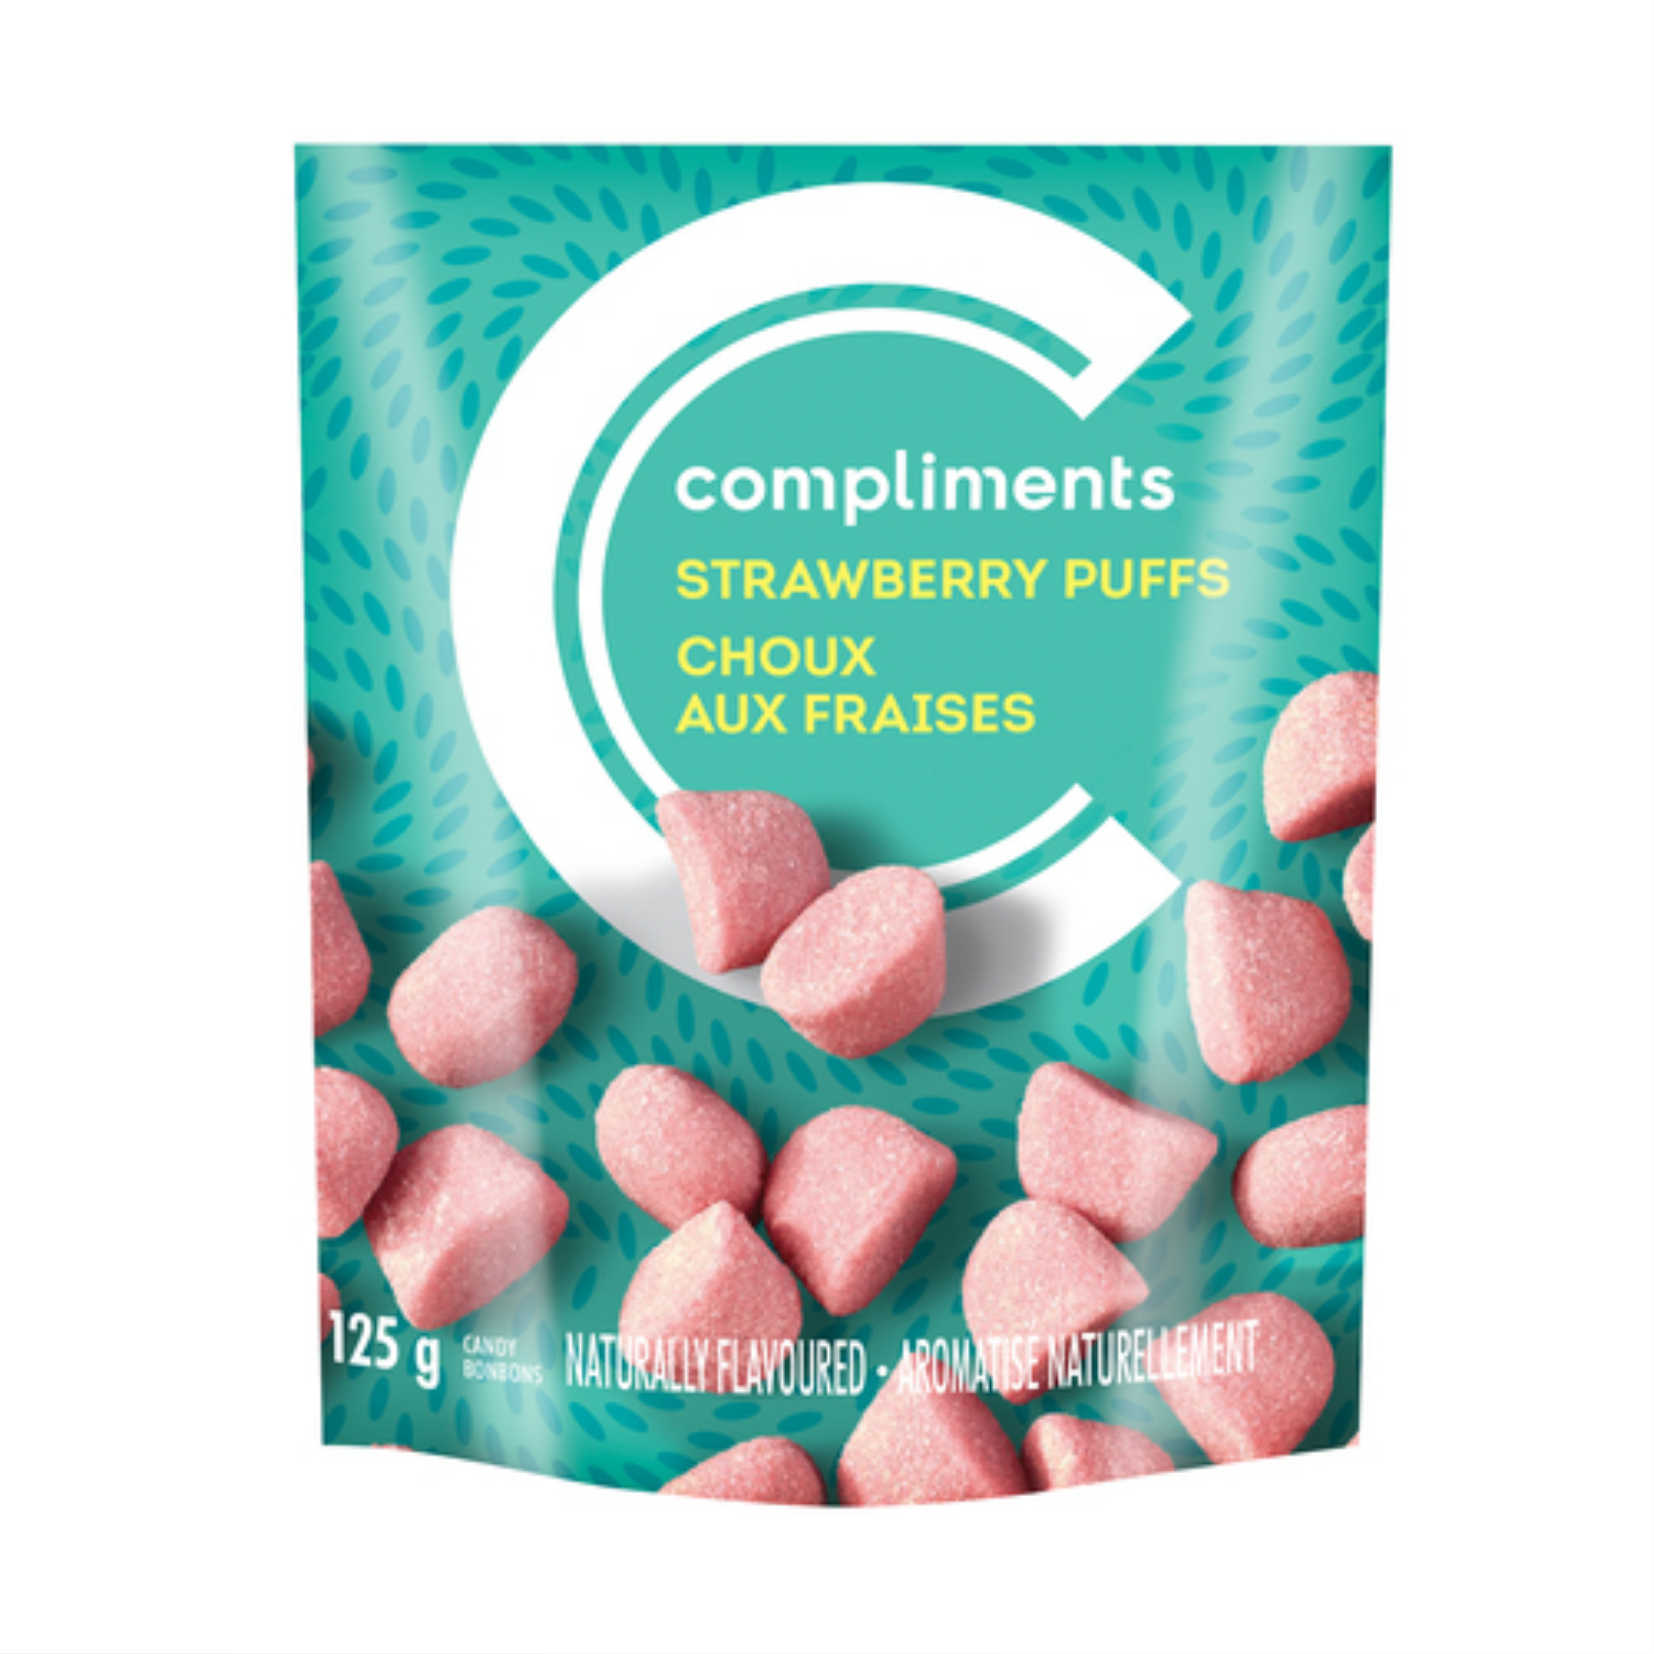 Compliments Strawberry Puffs 125g